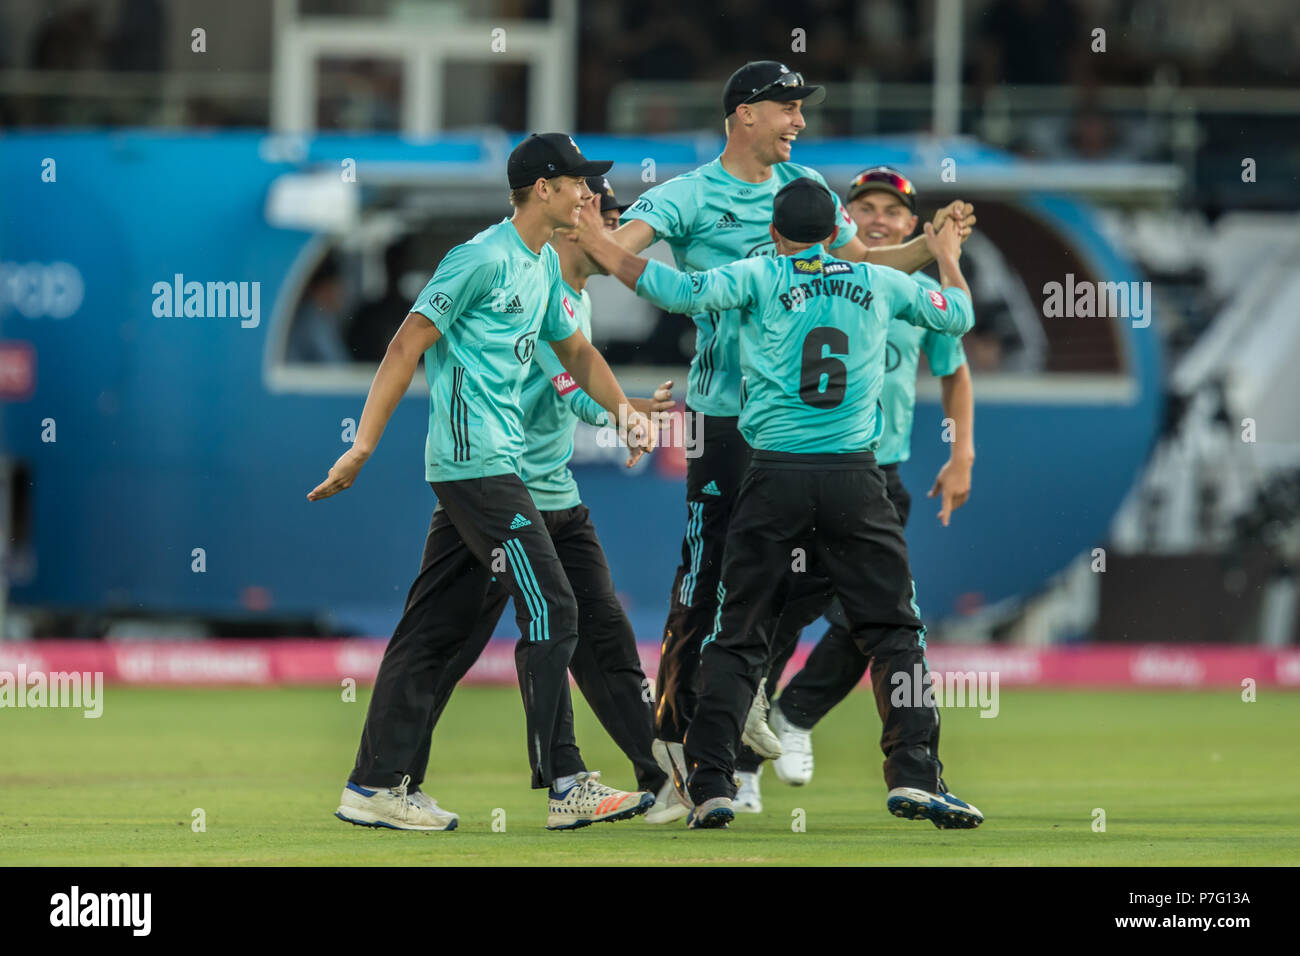 London, UK. 5 July, 2018.  The Surrey team celebrate ( L-R: Jamie Smith, Rory Burns [partly hidden] Will Jacks [jumping], Scott Borthwick and Sam Curran) after Will Jacks holds on to a low catch on the boundary and Eskinazi  is out off the bowling of Morne Morkel. Middlesex v Surrey in the Vitality Blast T20 cricket match at Lords. David Rowe/Alamy Live News Stock Photo